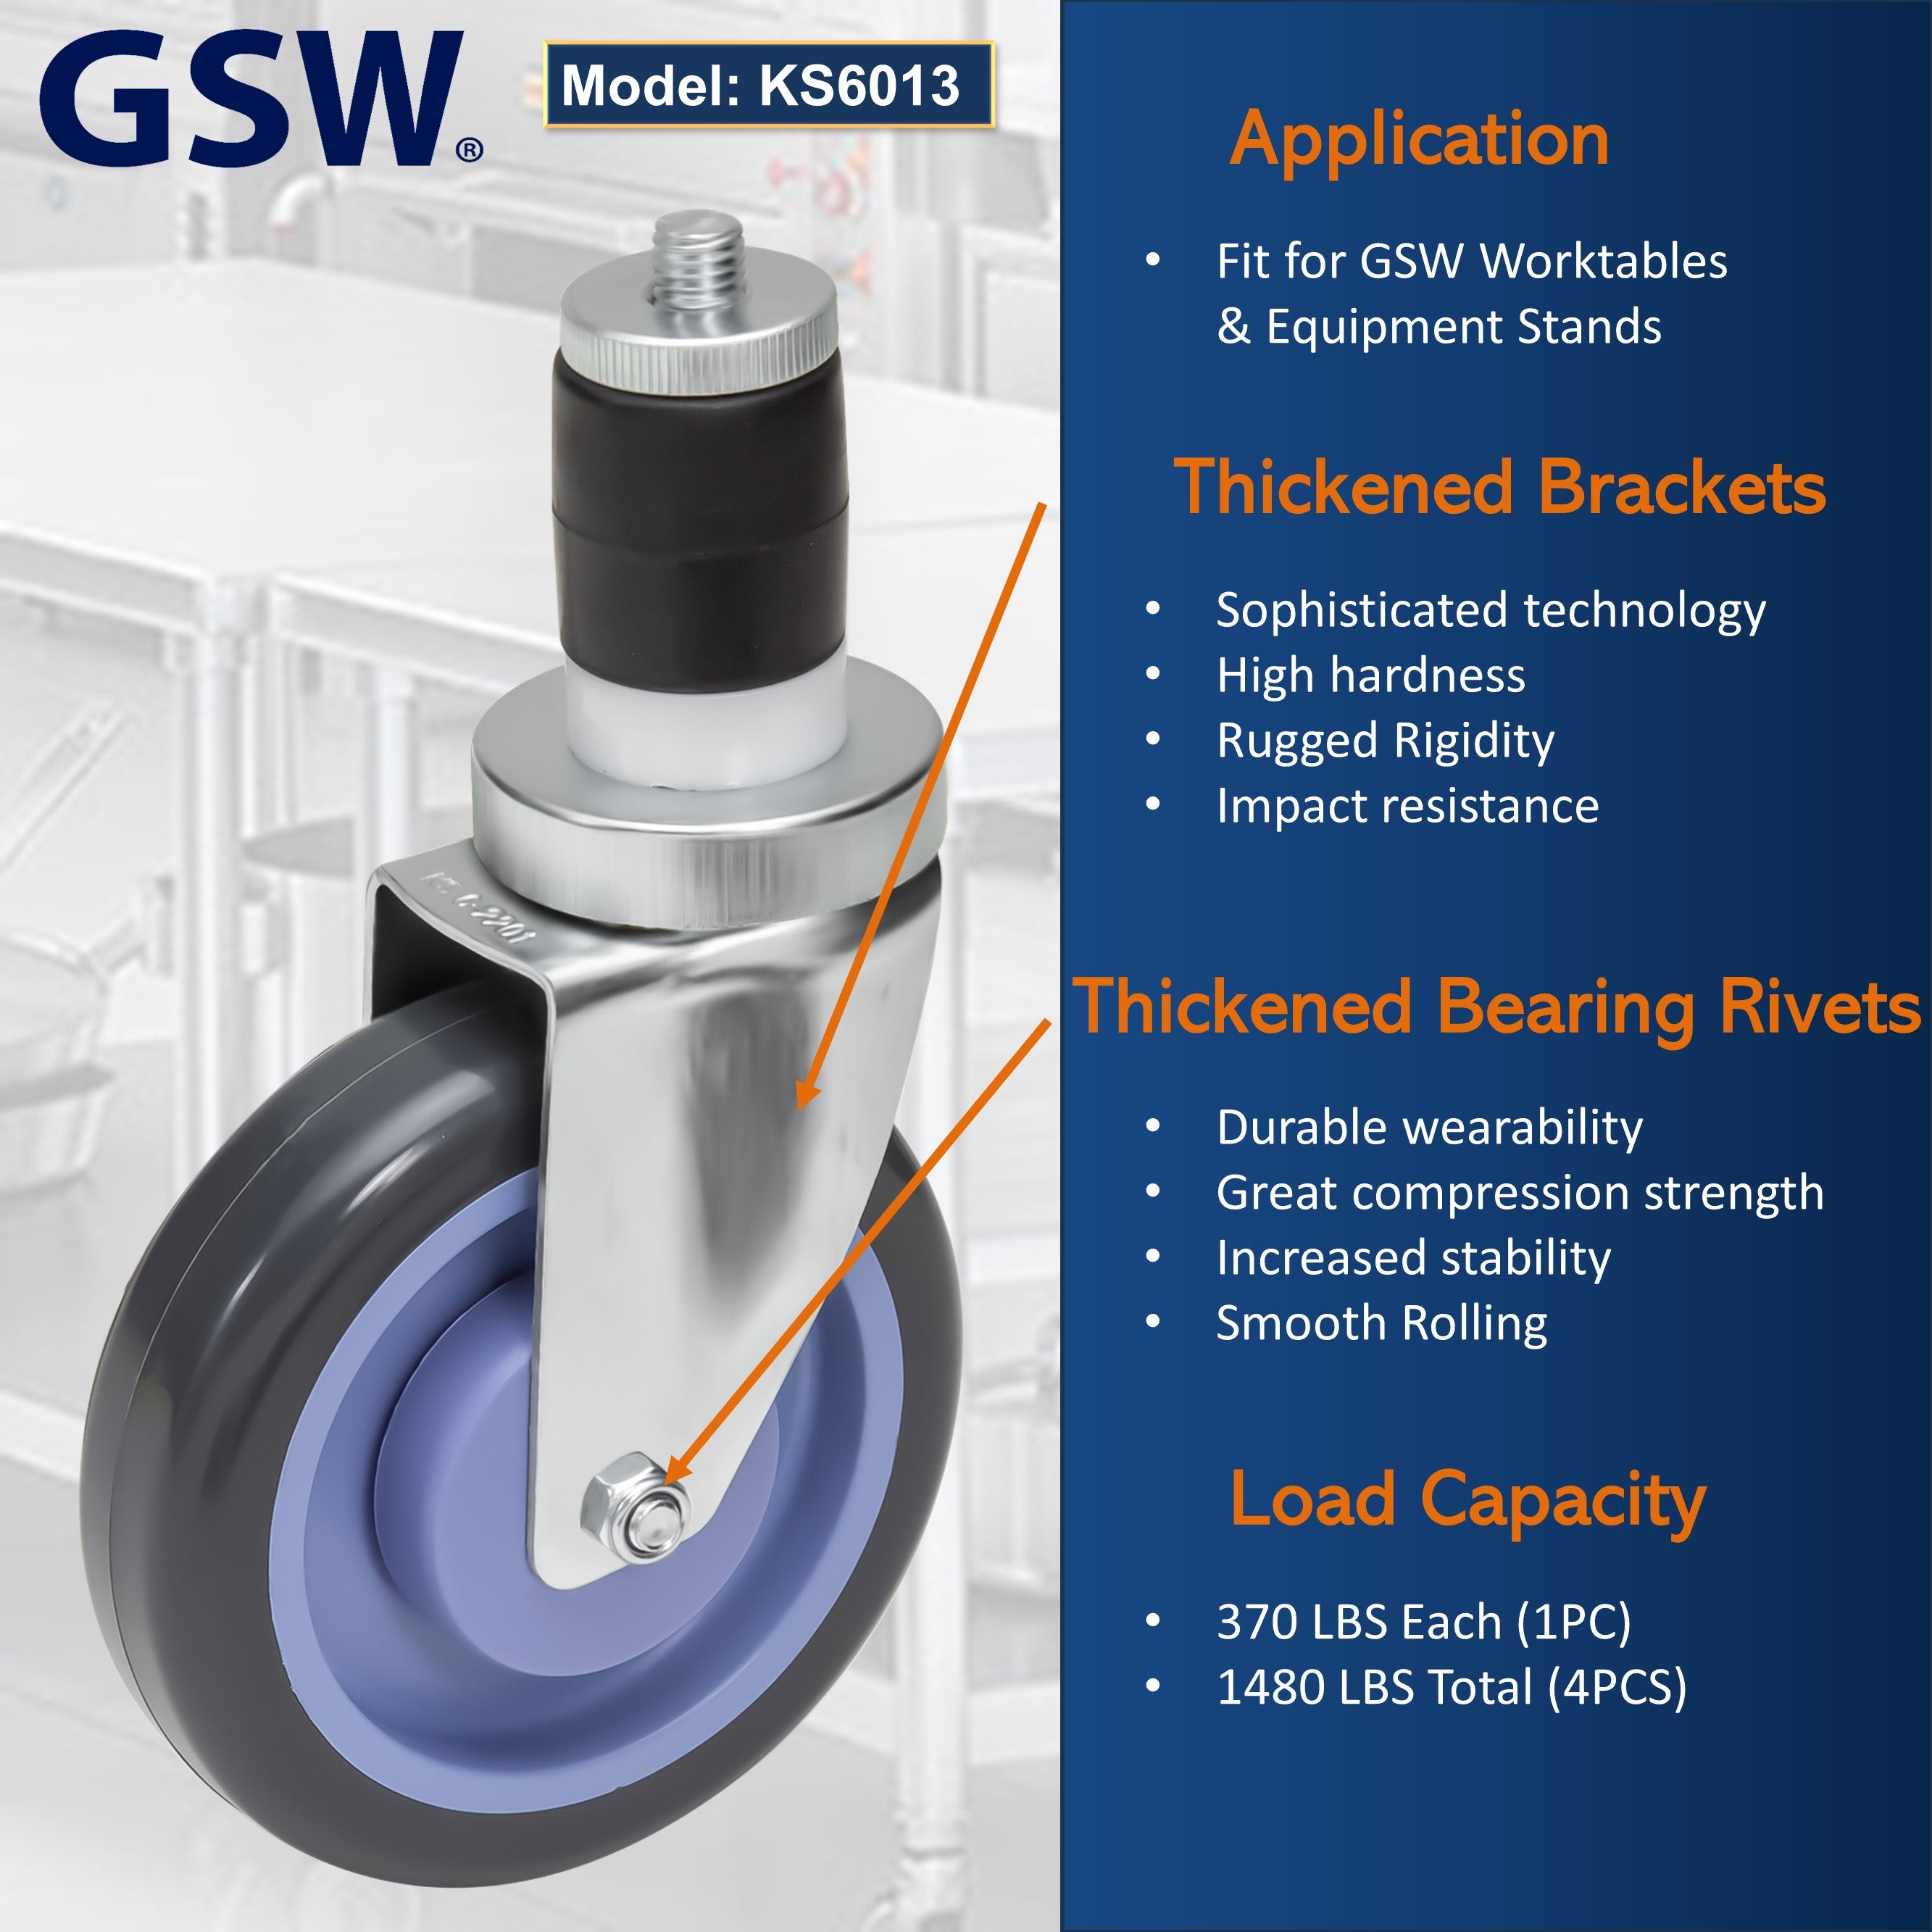 GSW 5" Heavy Duty Casters Wheels with Expanding Stem - Loading Capacity: 1480 lbs. Use for Worktables and Equipment Stands (Swivel)